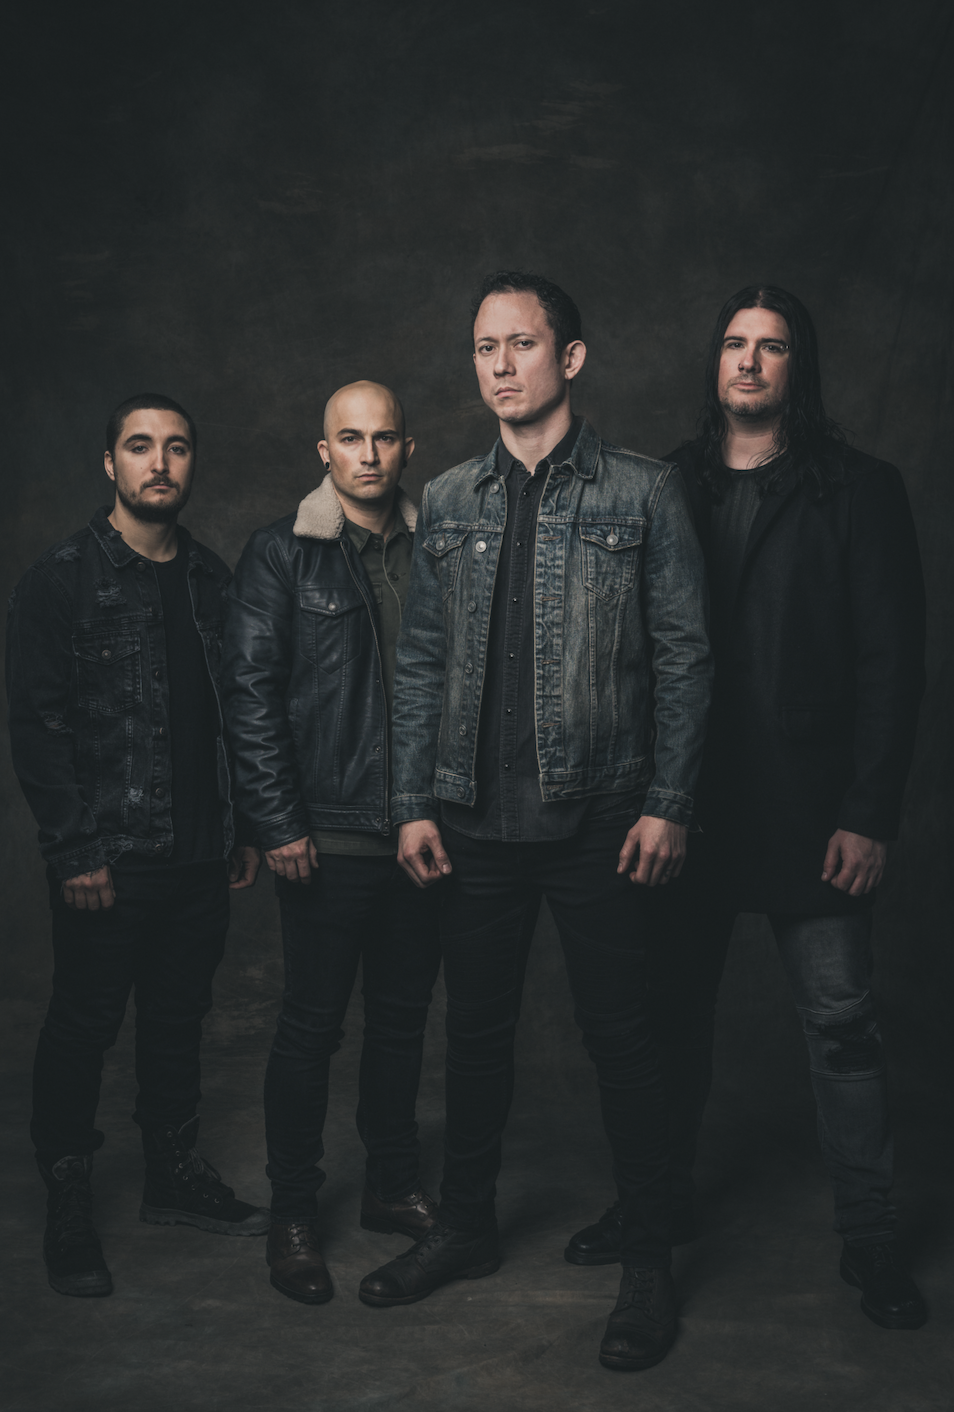 Trivium Release Share New Song "Bleed Into Me" + Release Week Events